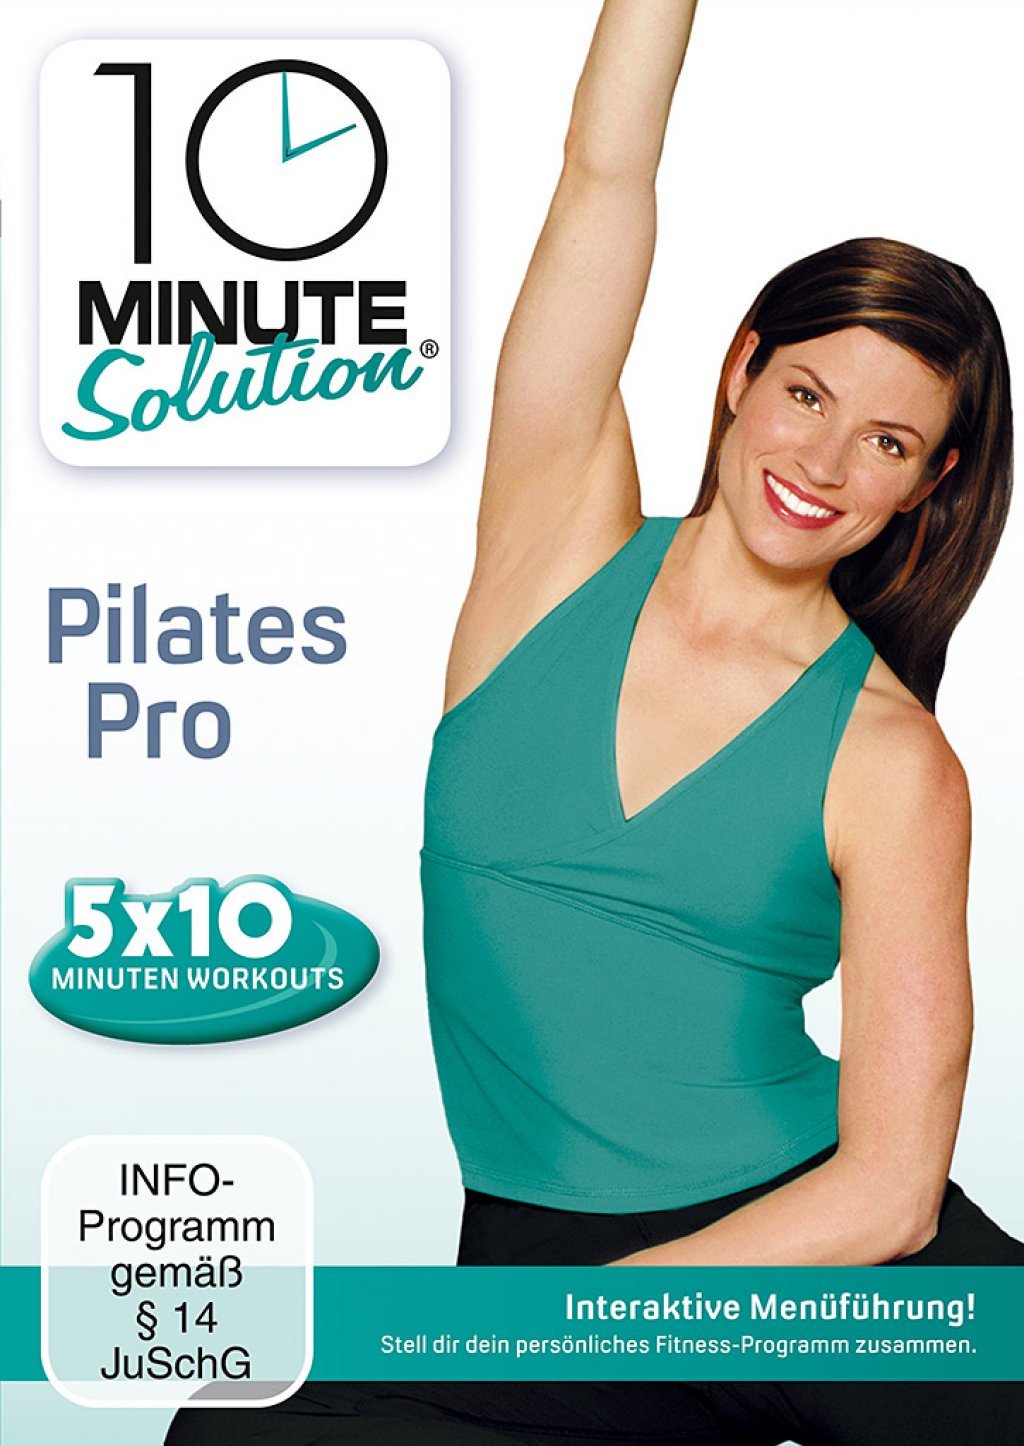 Simple 10 minute pilates workout dvd with Comfort Workout Clothes